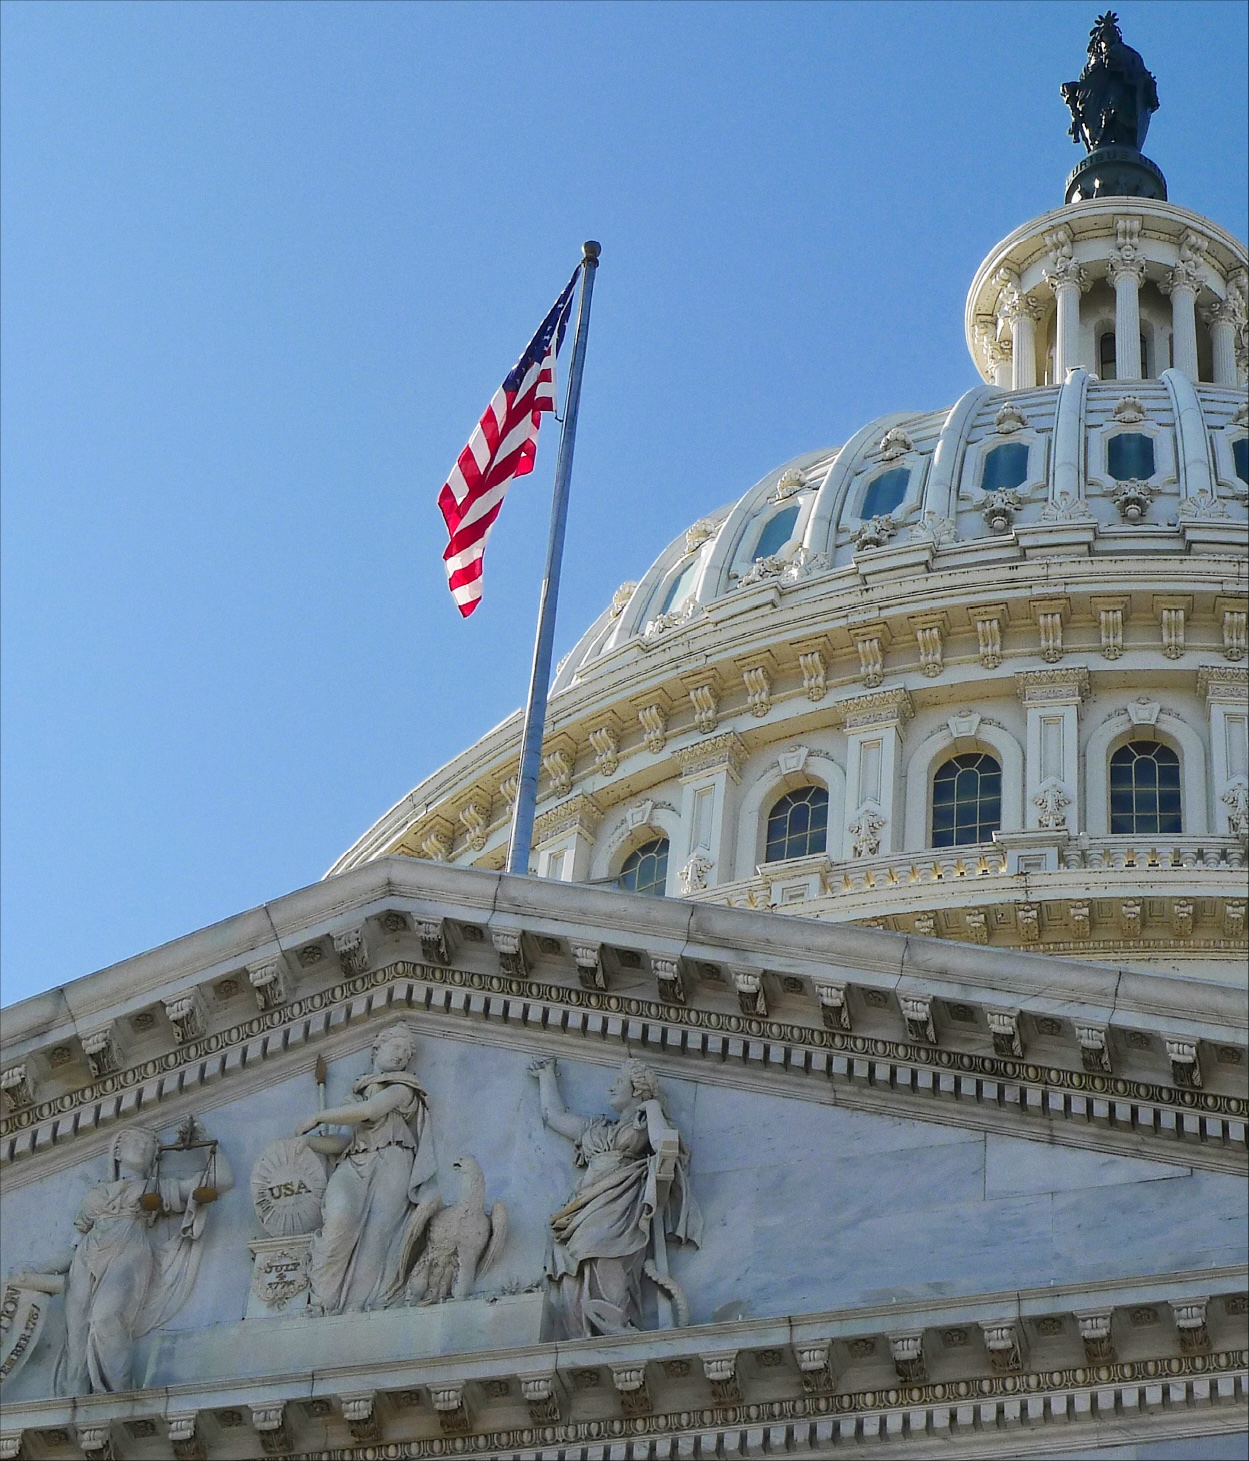 Photo of the US flag on the Capitol's roof in front of the rotunda.